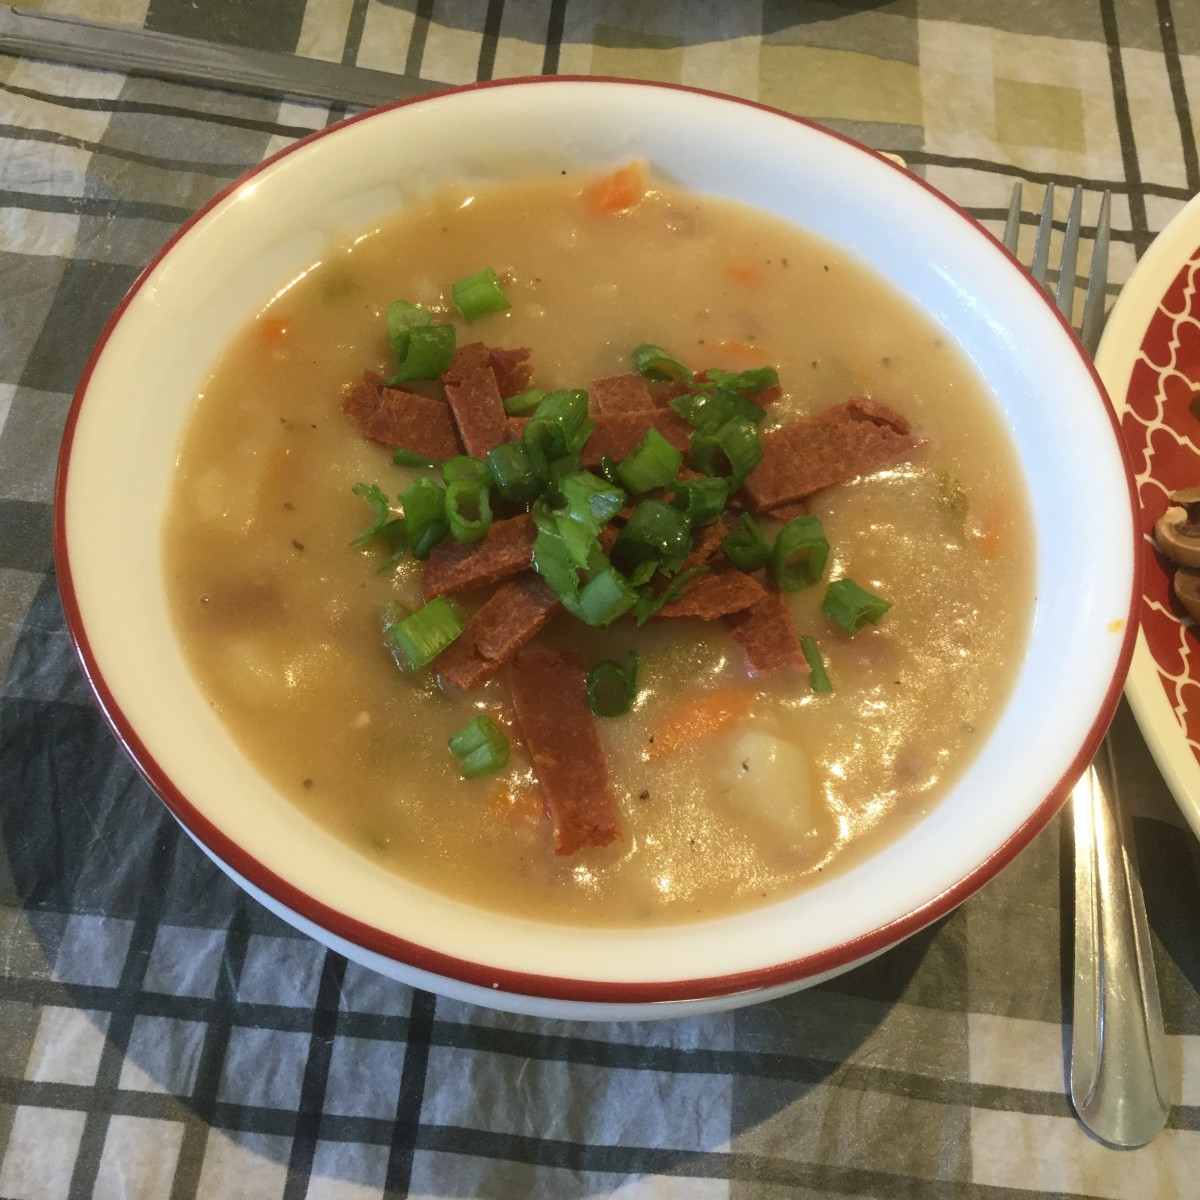 Vegan potato soup topped with green onion and sliced vegan bacon.